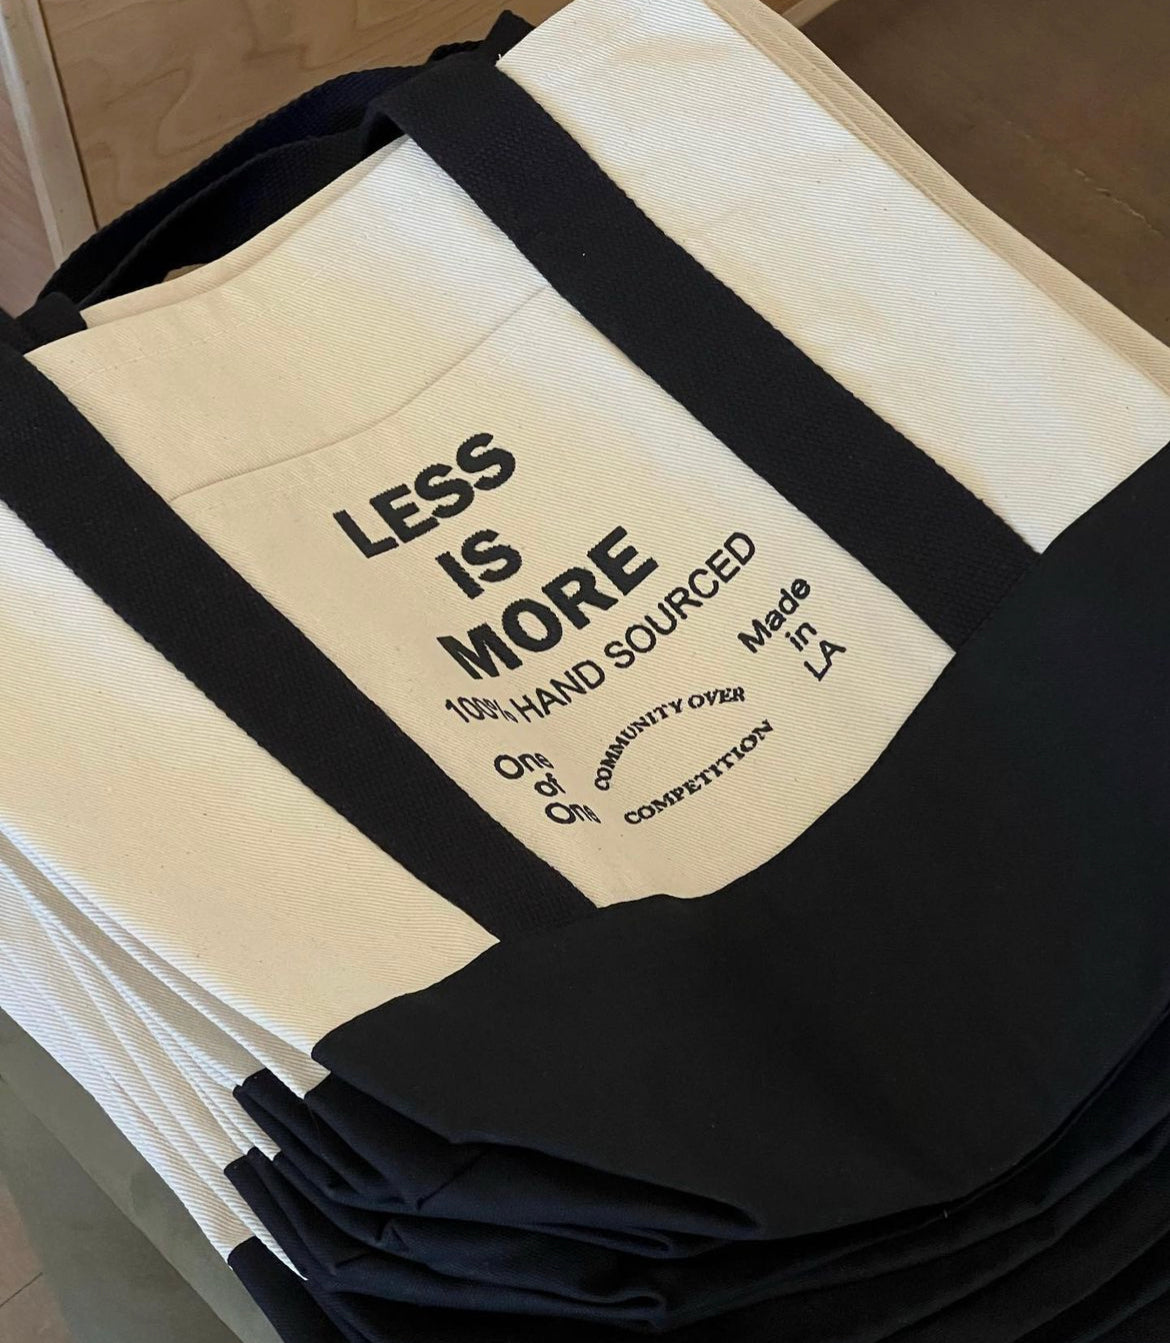 The Less Is More Tote